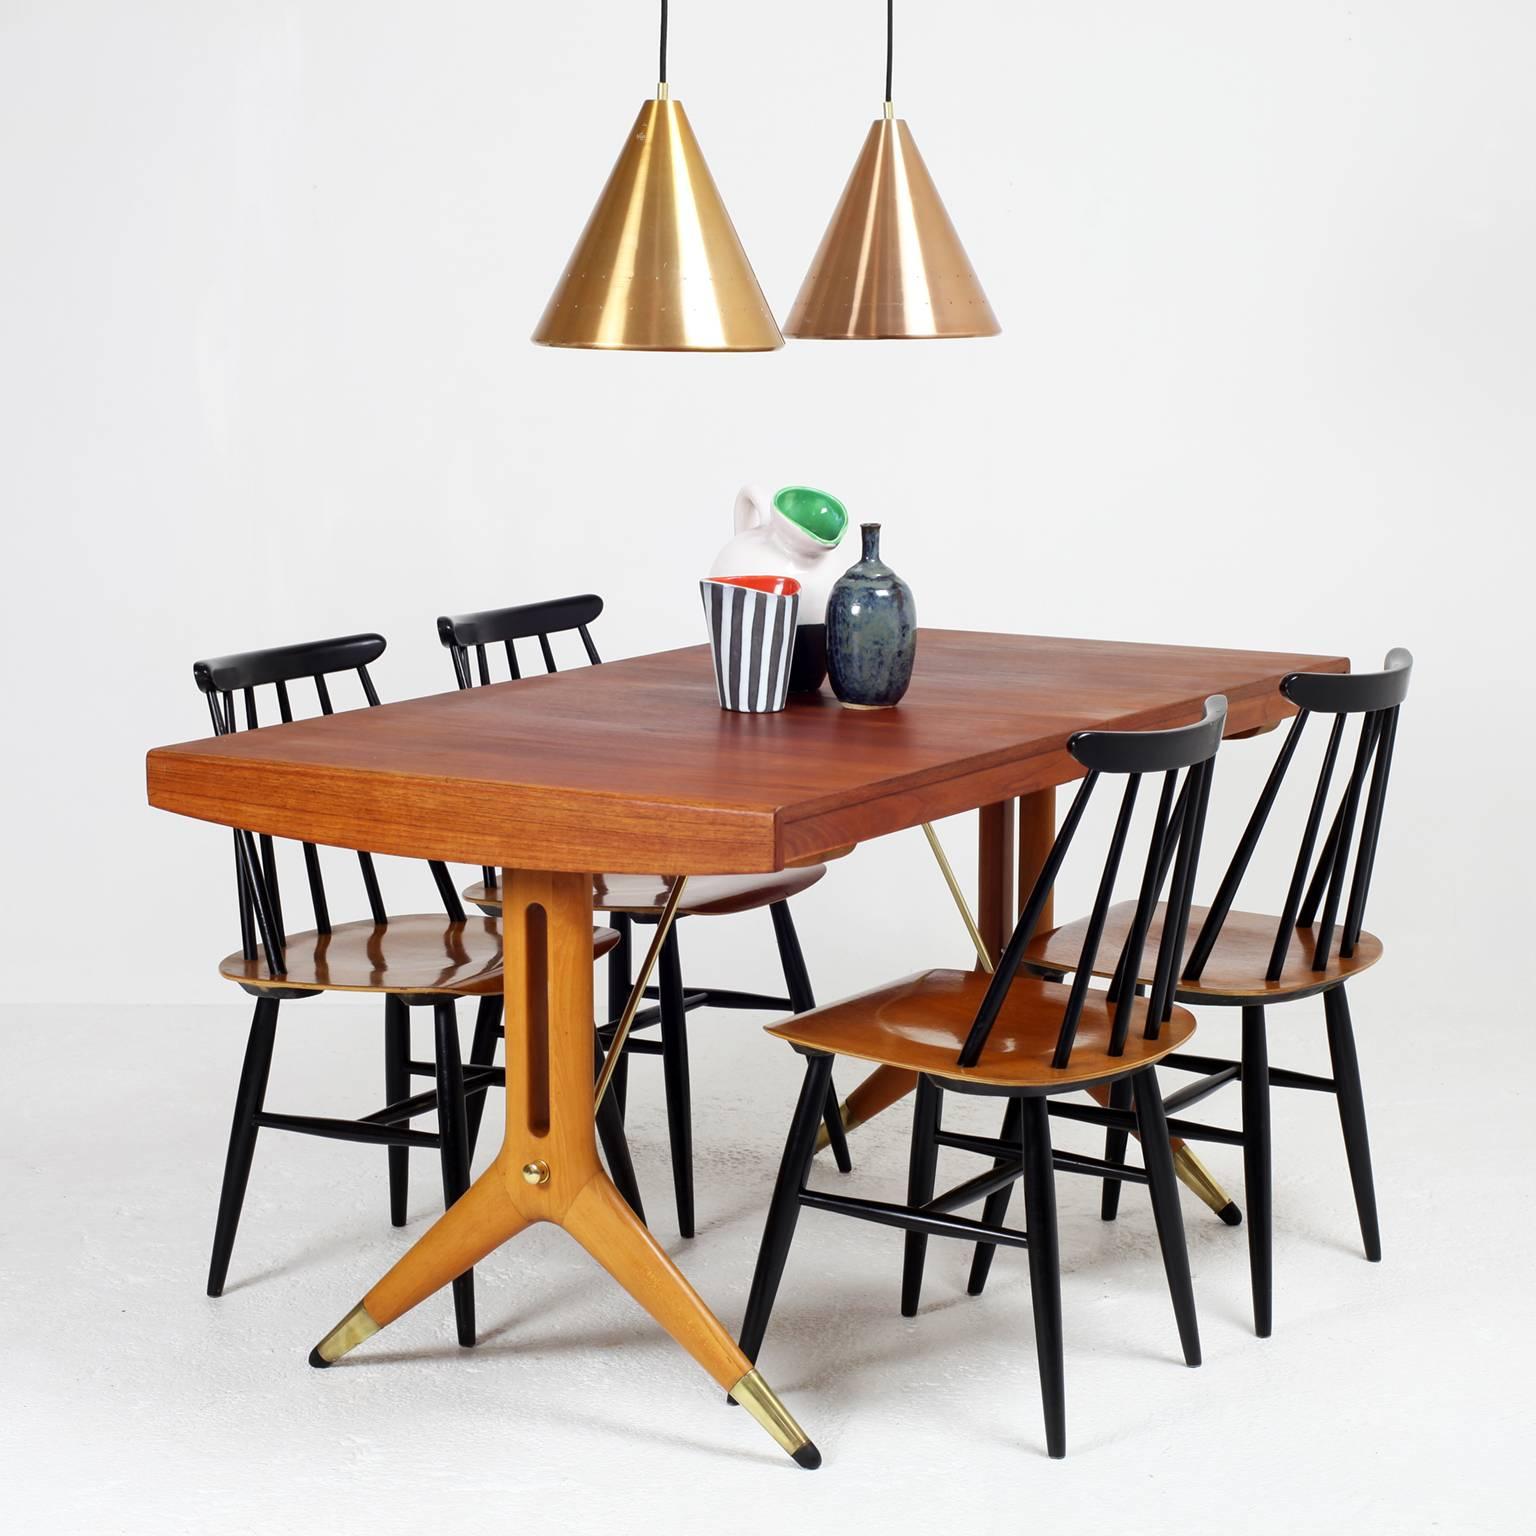 Very chic dining table designed by David Rosen for Nordiska Kompaniet, Sweden in the 1950s. Beech base with brass details and teak top. Two extensions : length: 146 cm up to 236 cm.